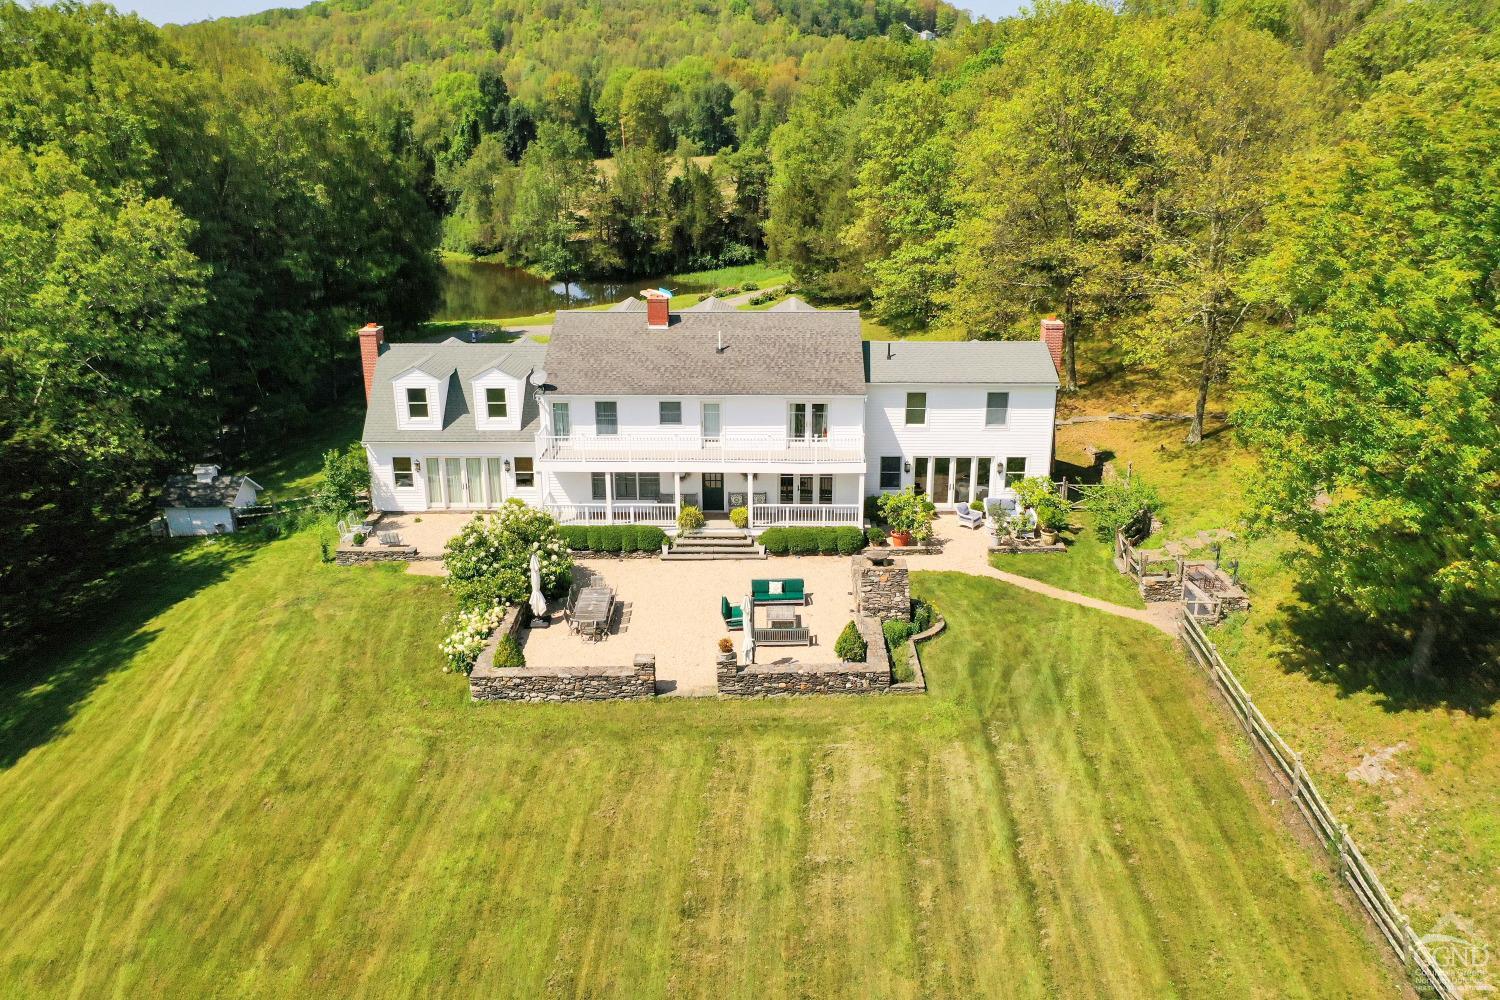 Property for Sale at 182 Silvernails Road, Gallatin, New York - Bedrooms: 5 
Bathrooms: 6 
Rooms: 12  - $2,950,000